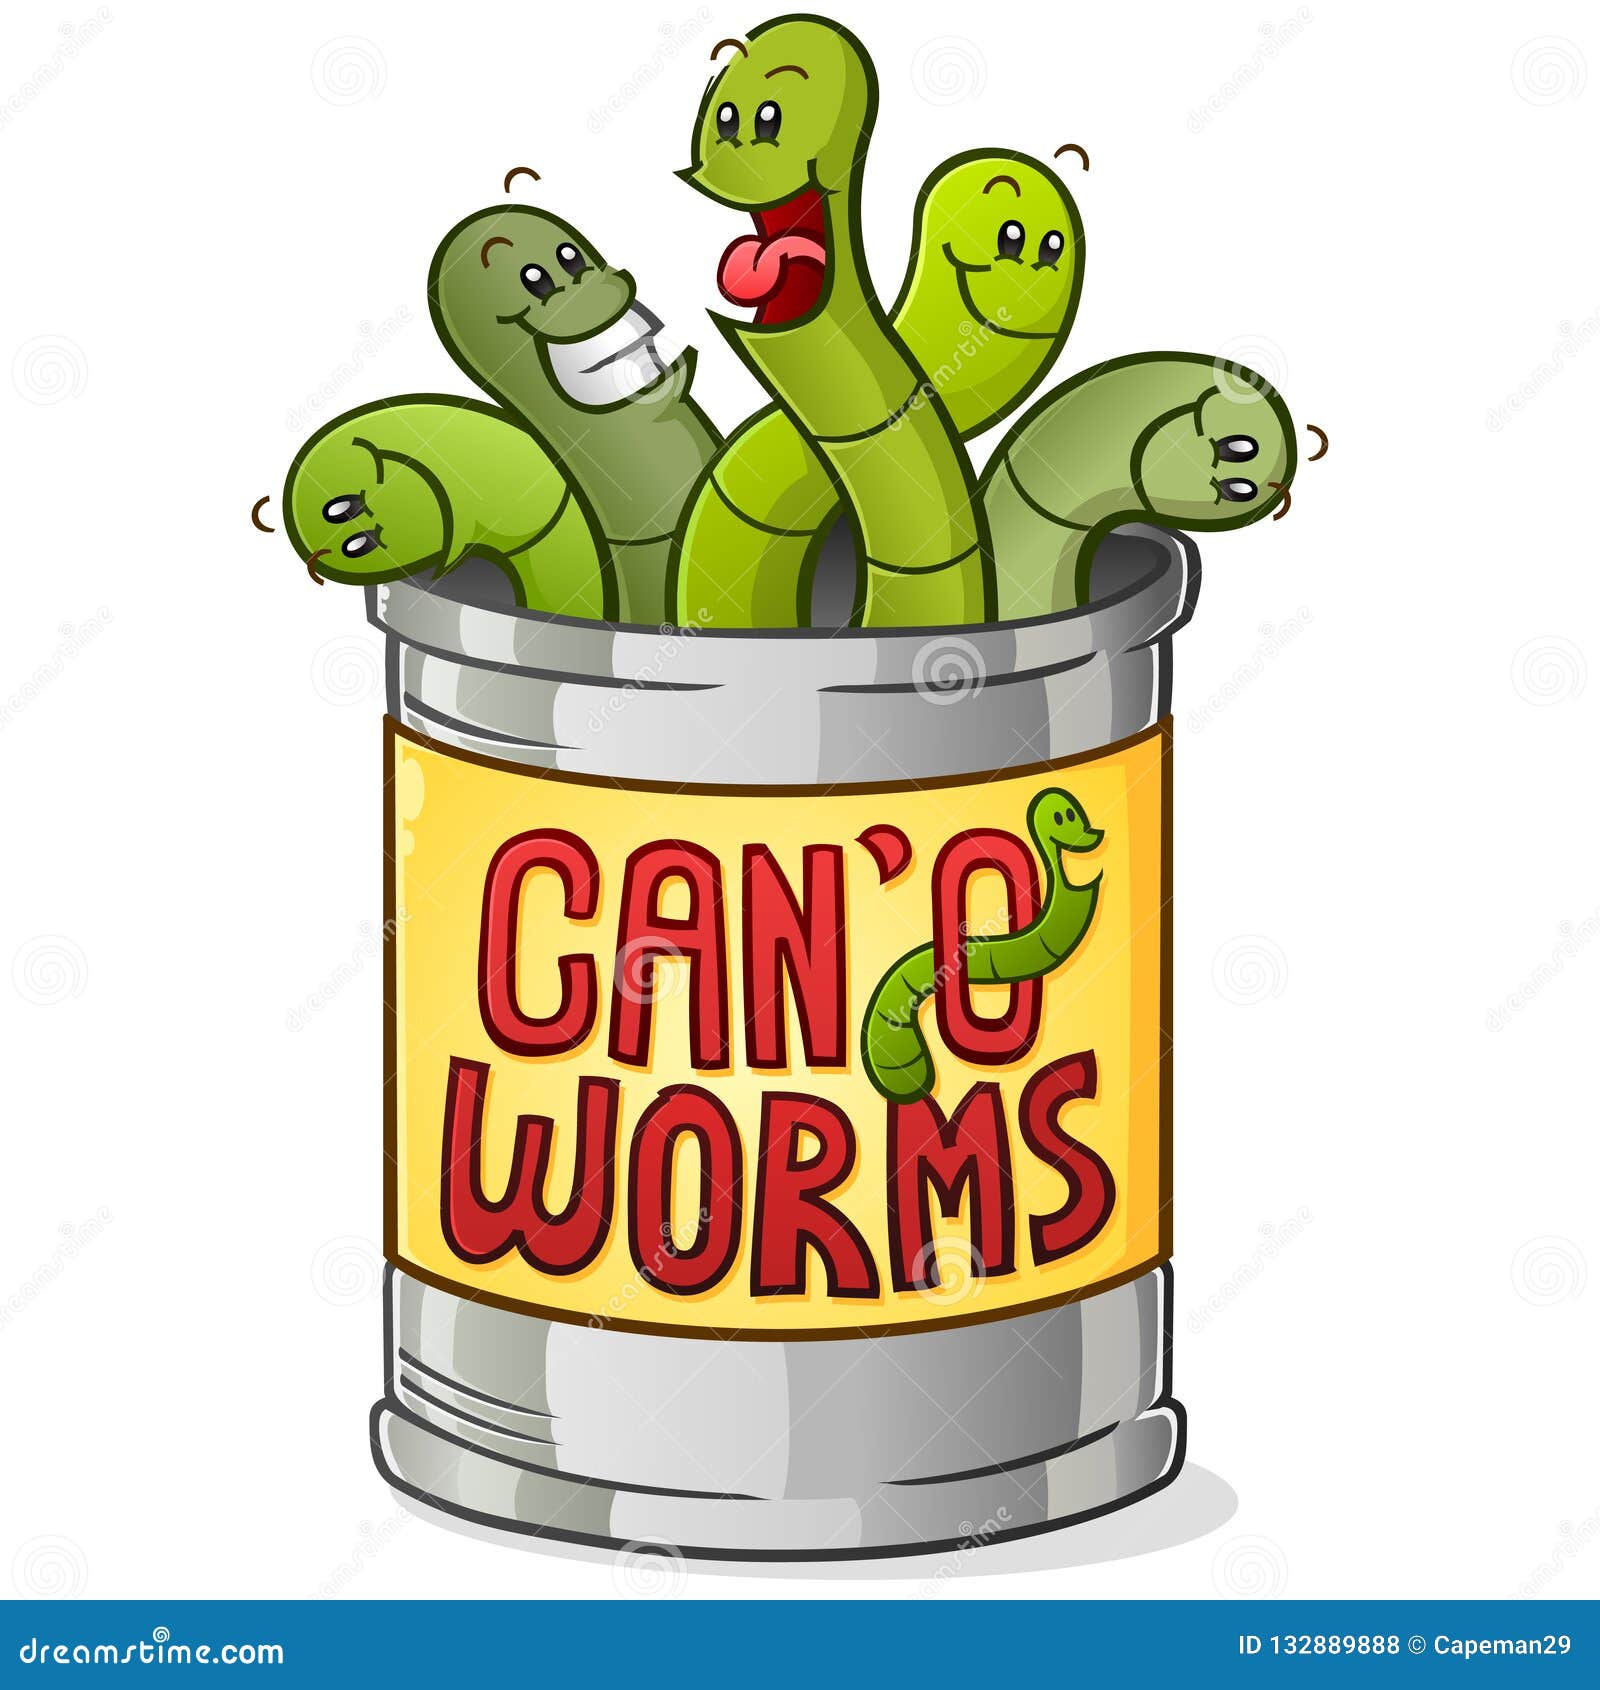 can-worms-cartoon-character-bunch-happy-smiling-tin-signifying-saying-meaning-hard-to-handle-situation-problem-132889888.jpg